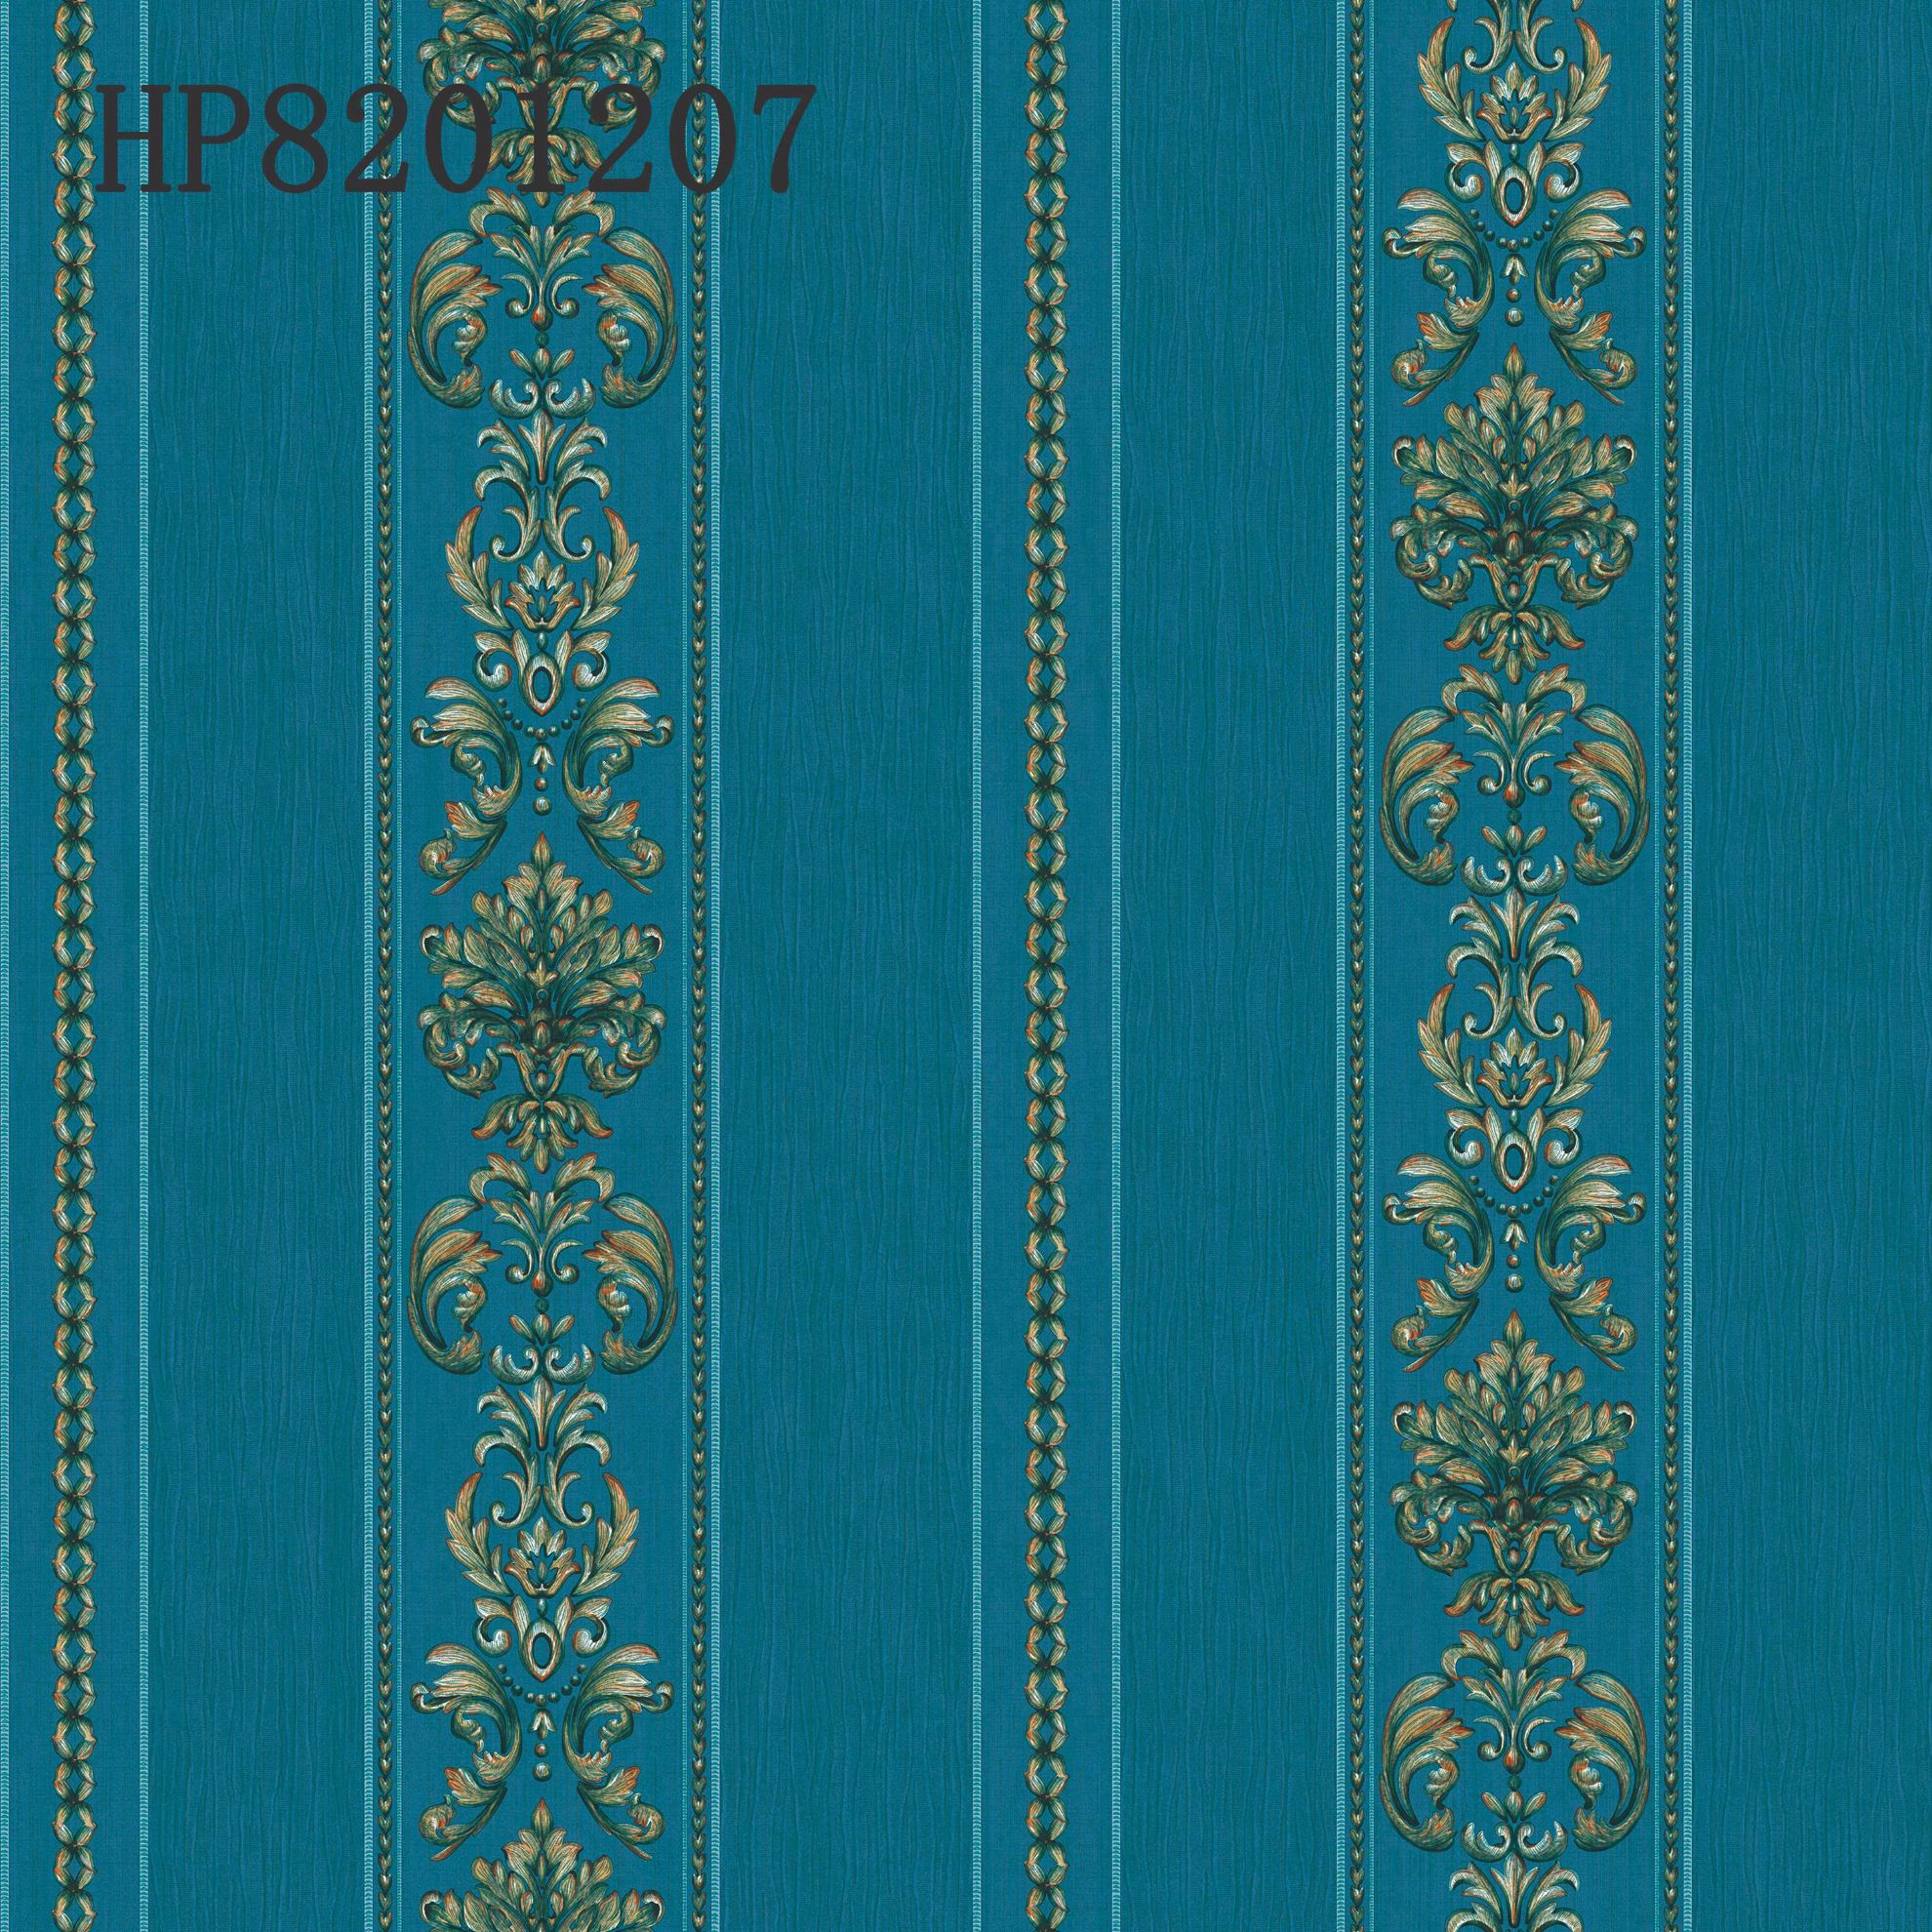 3d Wallpaper For Home Decoration HP82001207